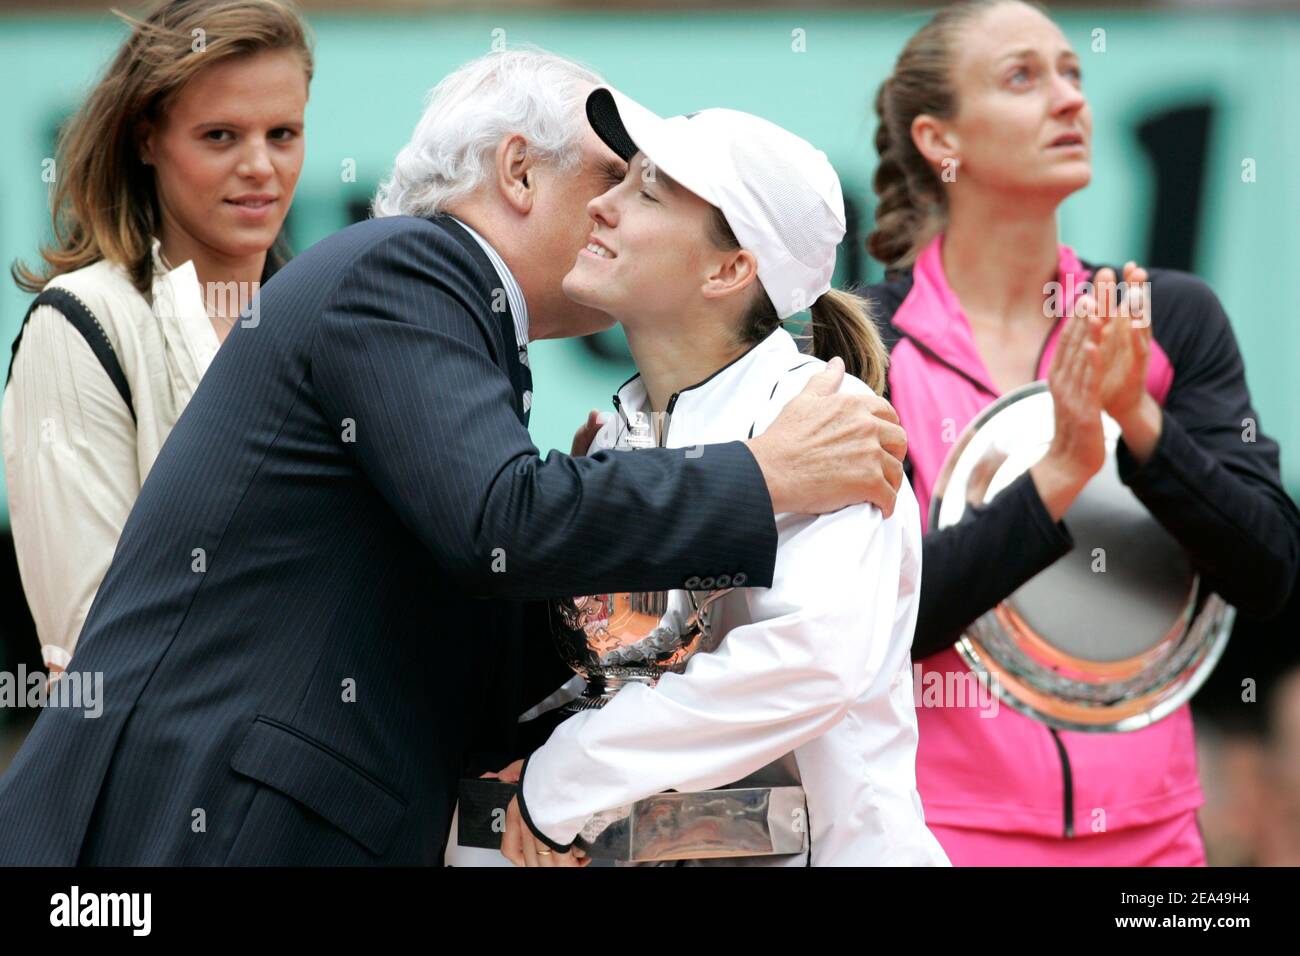 Belgian Justine Henin-Hardenne defeats French Mary Pierce 6-1, 6-1 in the Final of the French Tennis open at Roland Garros arena in Paris, on June 4, 2005. Photo by Gorassini-Zabulon/CAMELEON/ABACA. Stock Photo